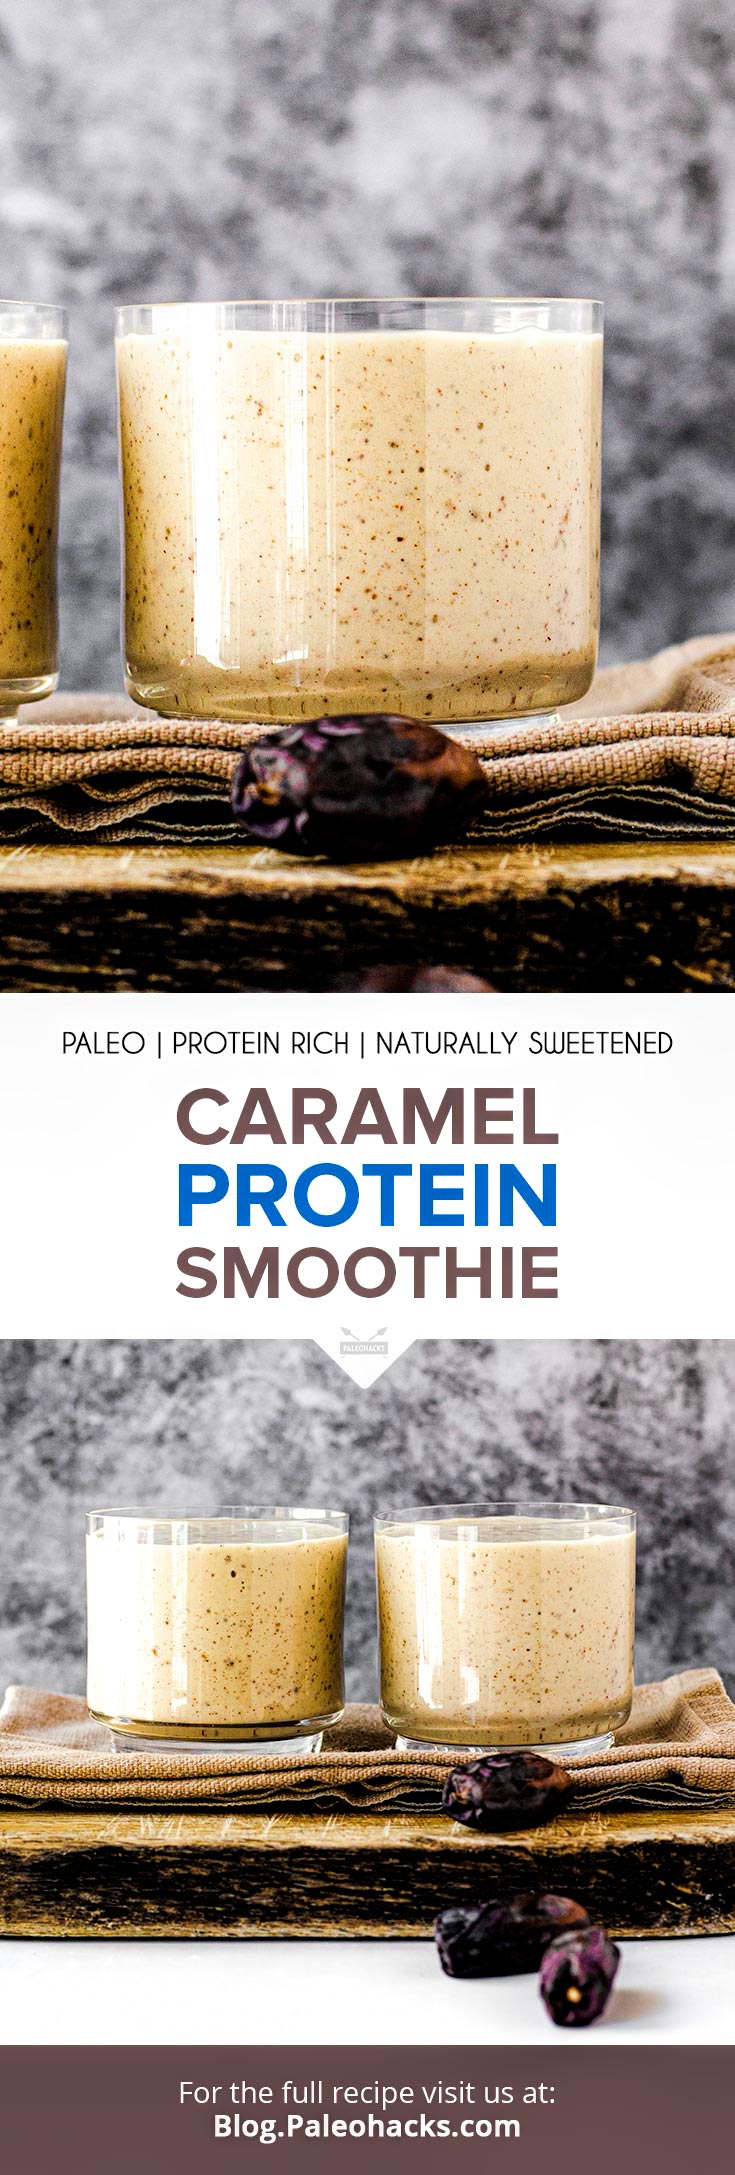 Whip up this caramel protein smoothie in just 5 minutes using wholesome, natural ingredients. Simple, sweet, and oh so satisfying!